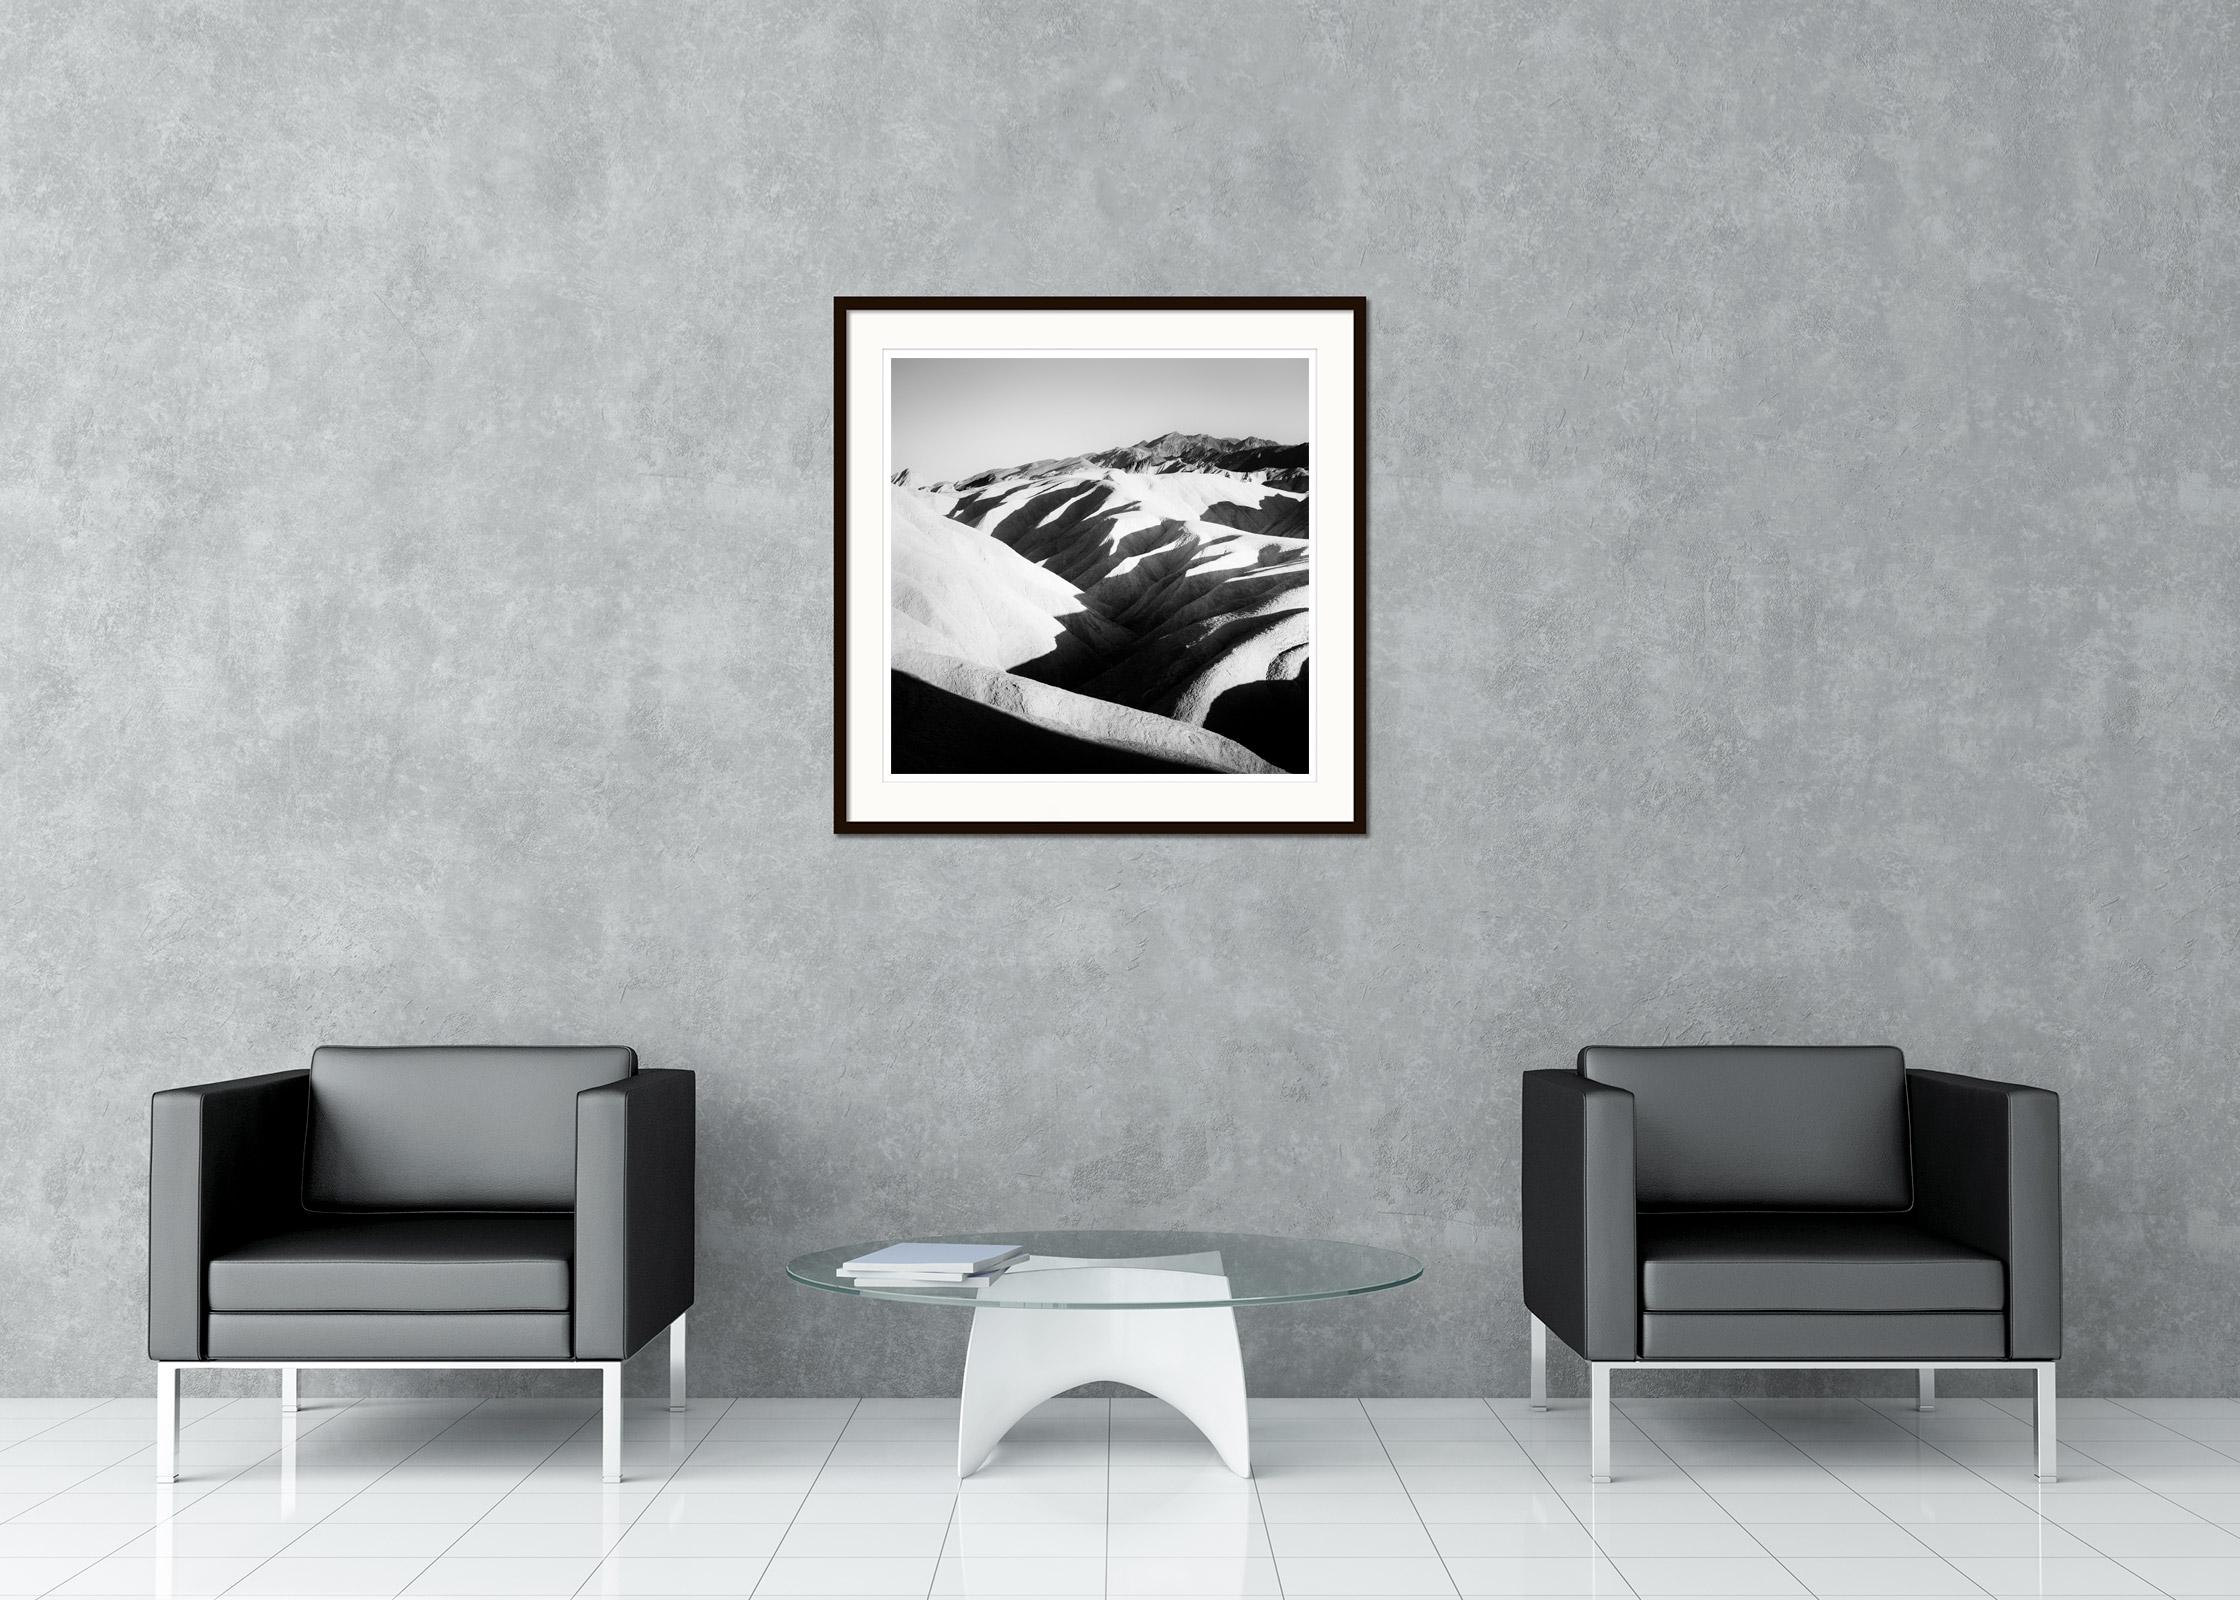 Black and White Fine Art landscape photography. Archival pigment ink print, edition of 9. Signed, titled, dated and numbered by artist. Certificate of authenticity included. Printed with 4cm white border.
International award winner photographer -